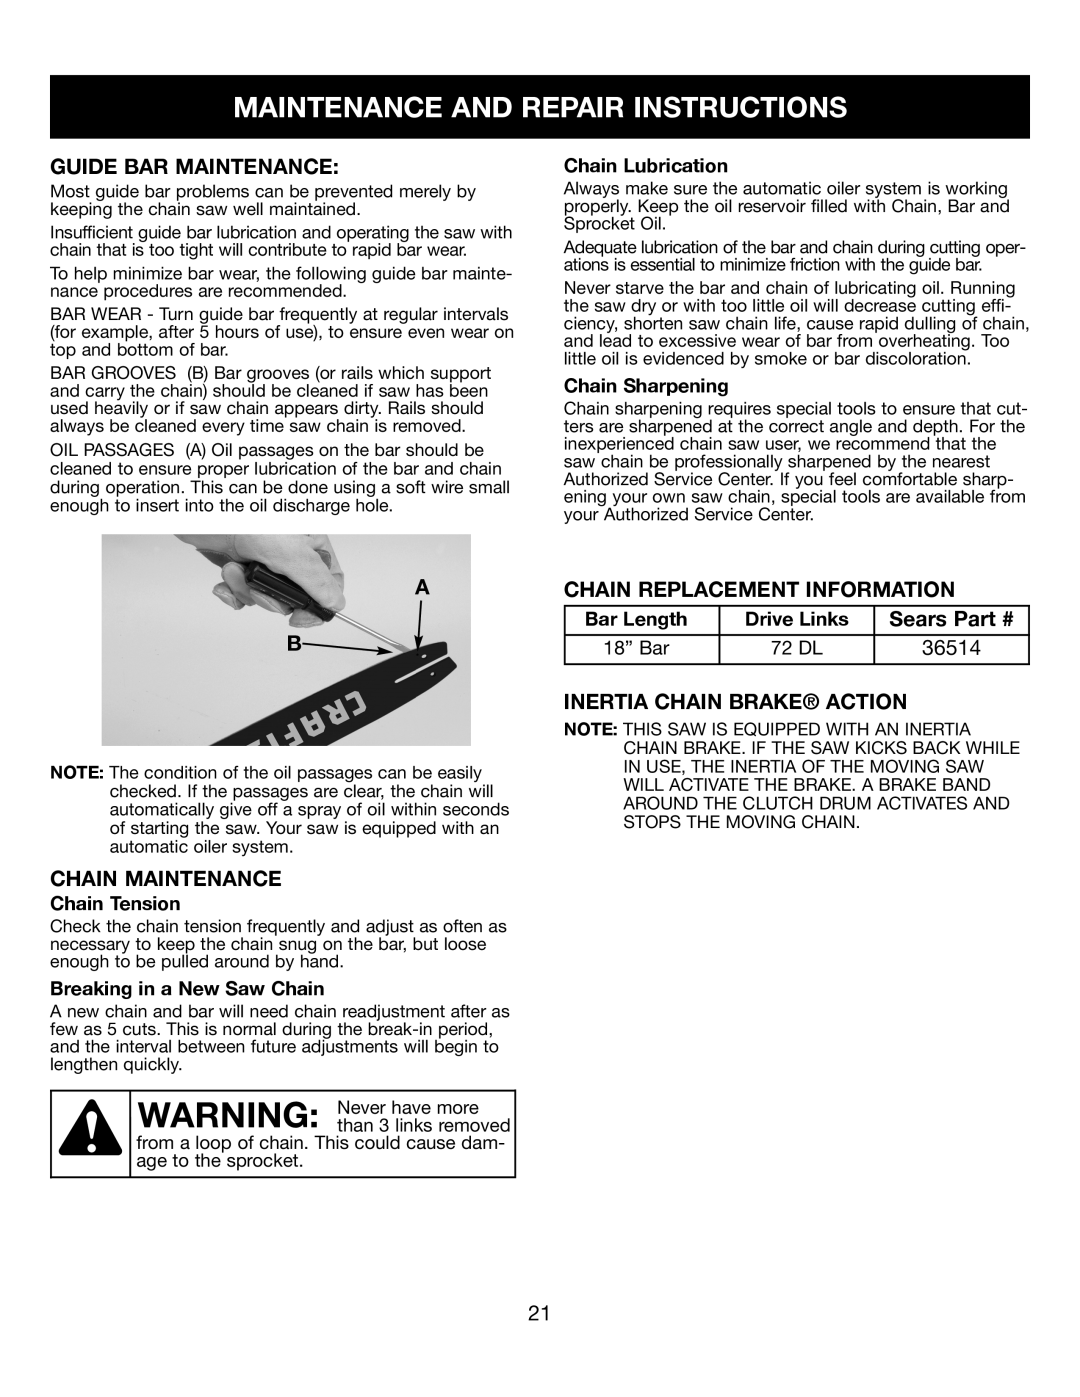 Craftsman 316350840 Maintenance And Repair Instructions, Guide Bar Maintenance, Chain Maintenance, Sears, 18” Bar, 72 DL 